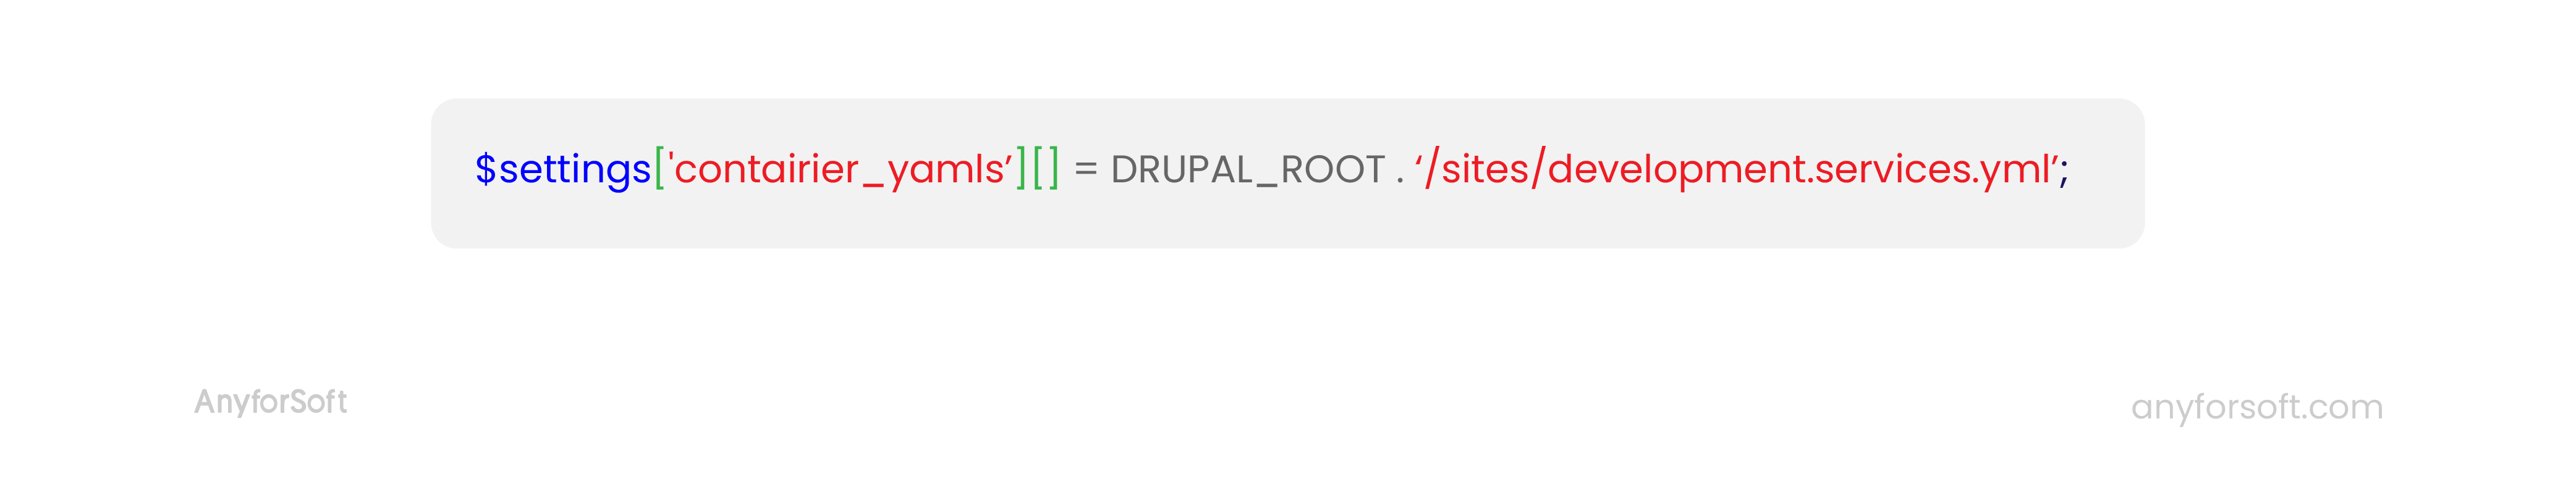 drupal root settings.local.php